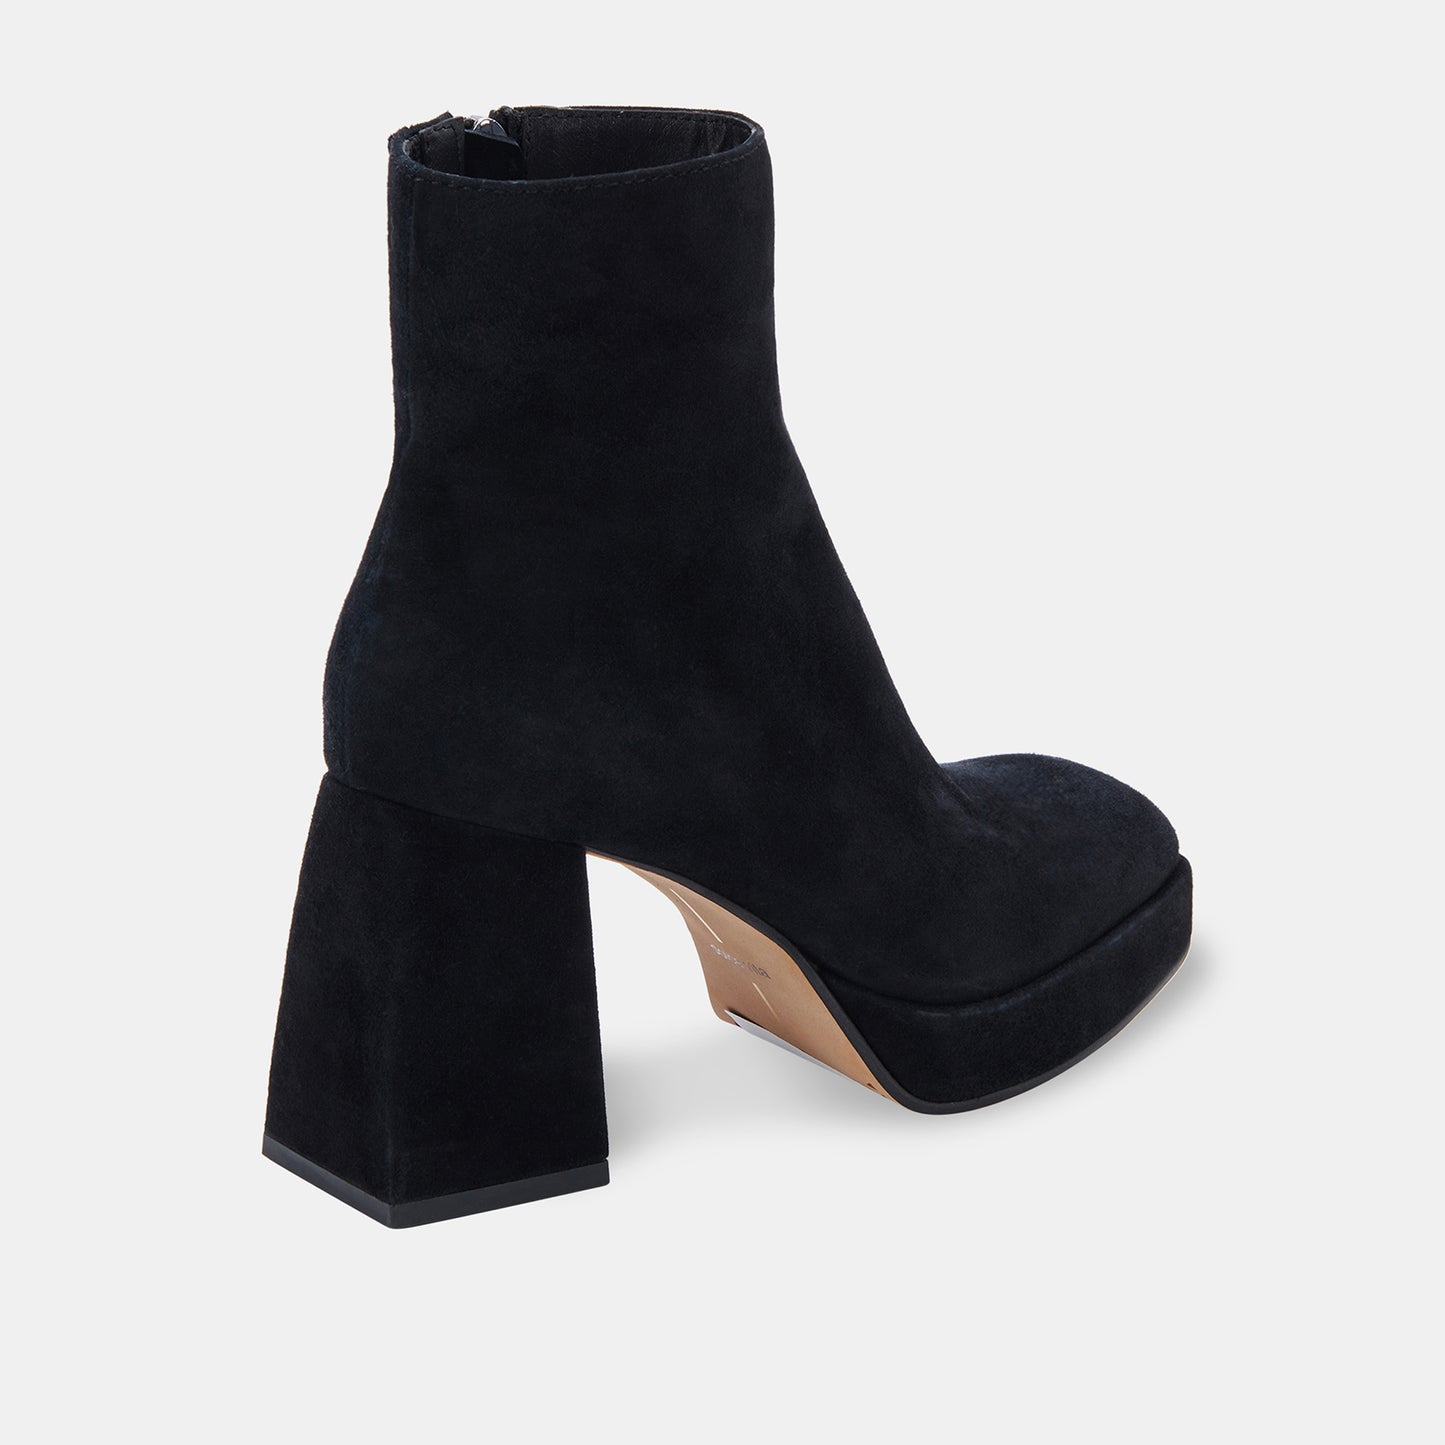 ULYSES BOOTS BLACK SUEDE